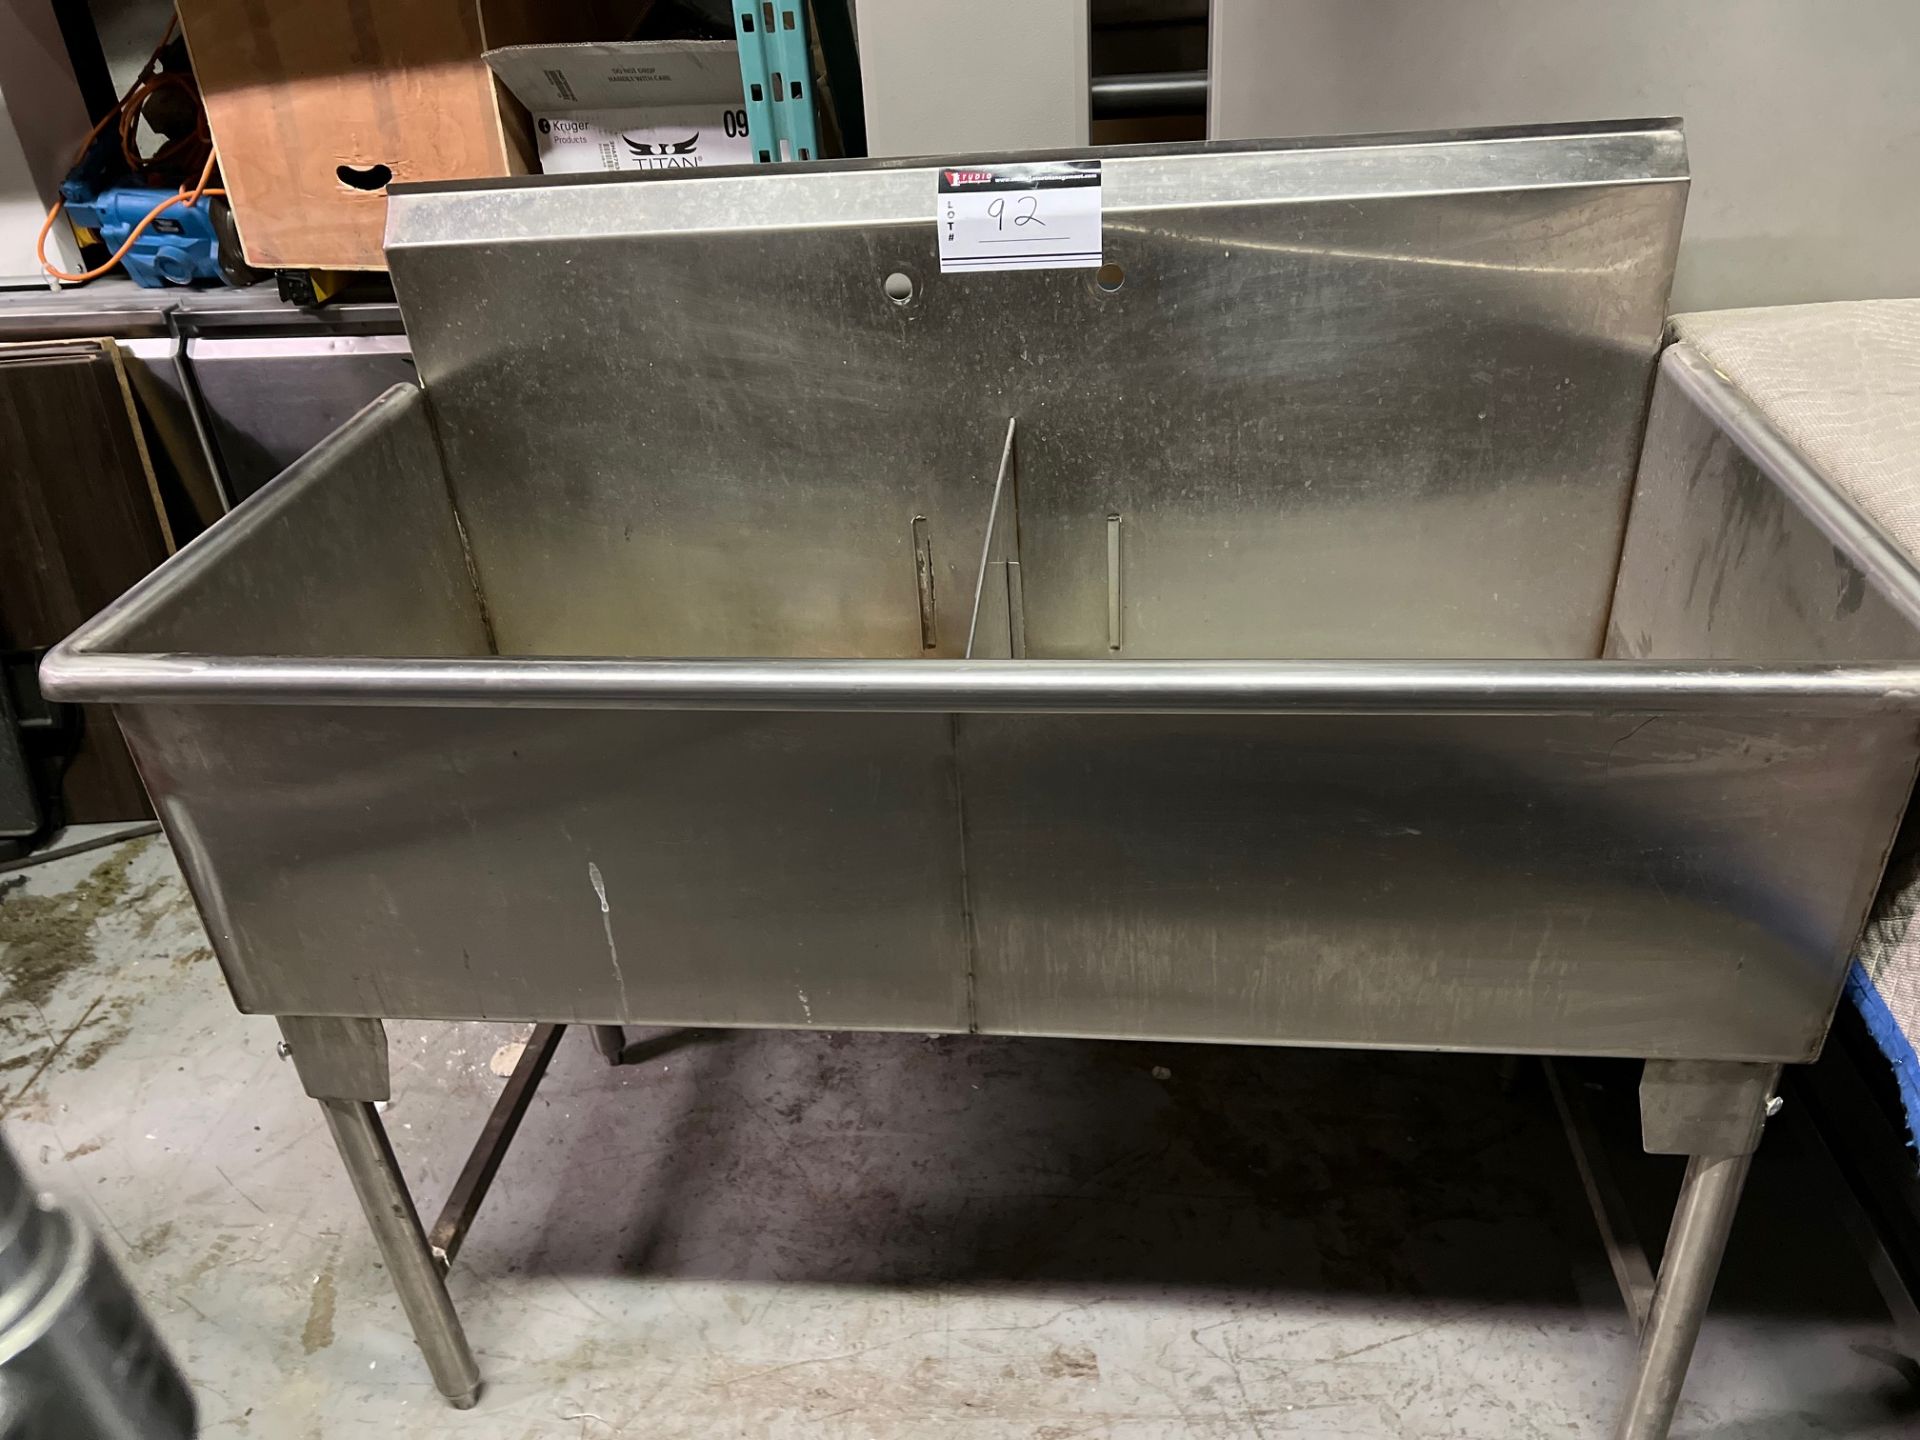 S/S DOUBLE WELL SINK, 51X 24"X12" DEEP, 53" TALL FROM GROUND